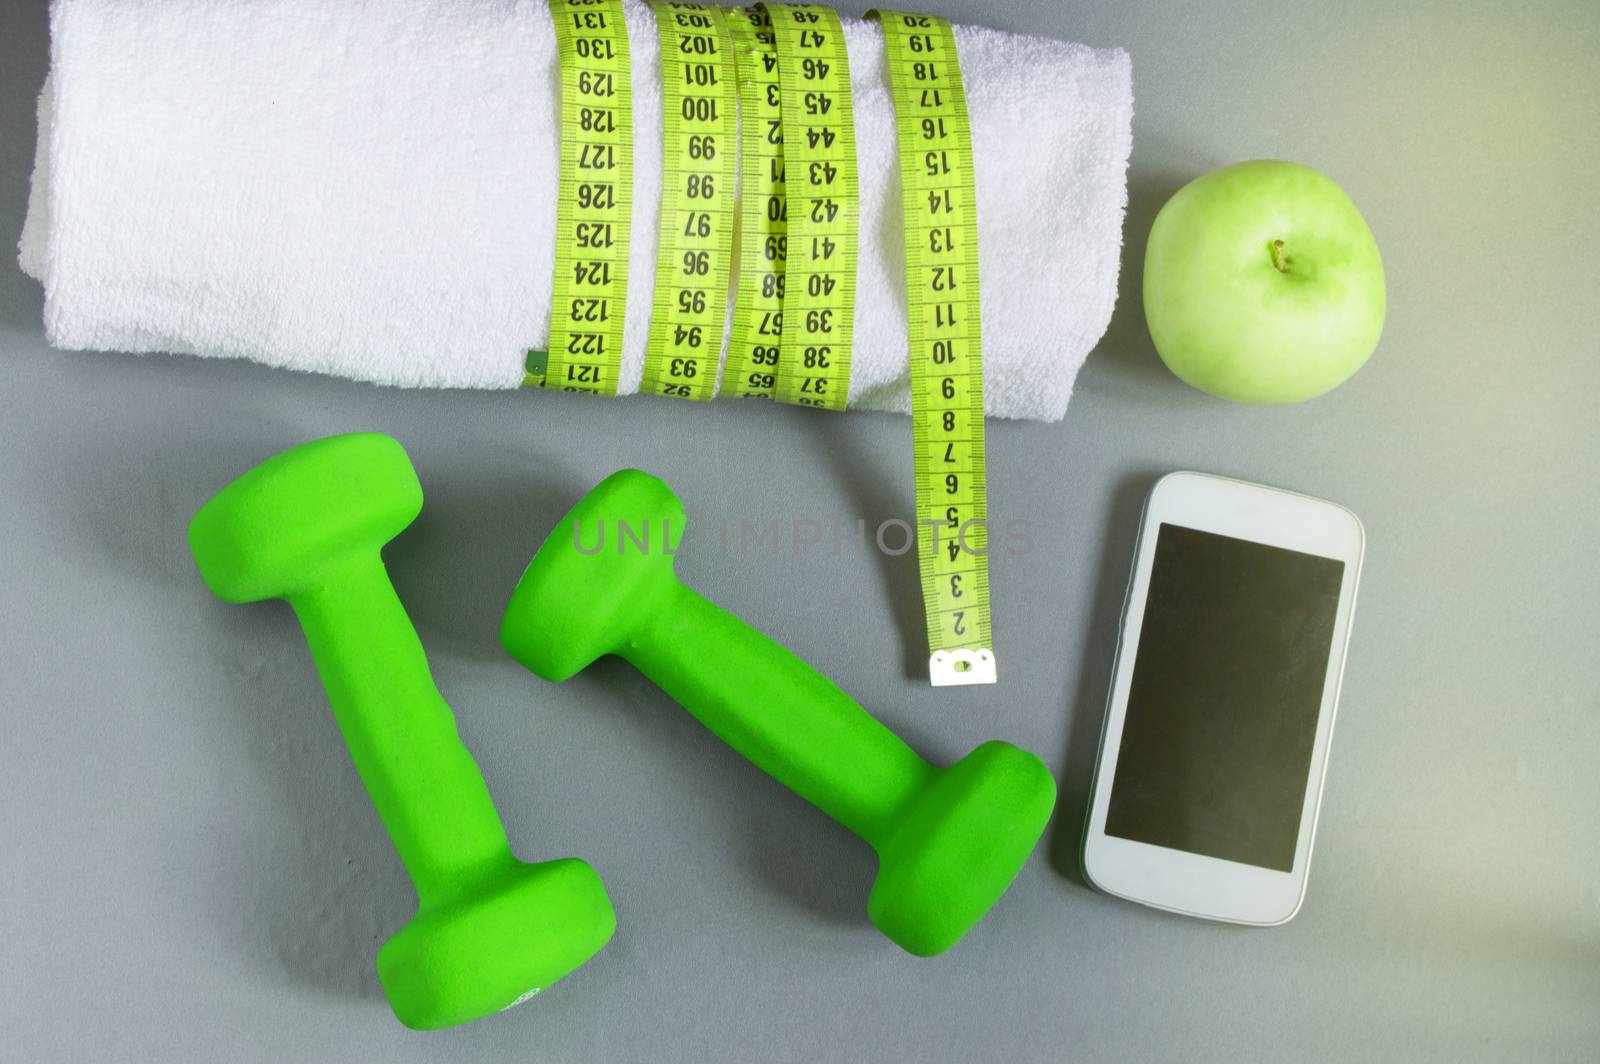 Fitness concept, dumbbell, mobile and a towel and measuring tape, top view.